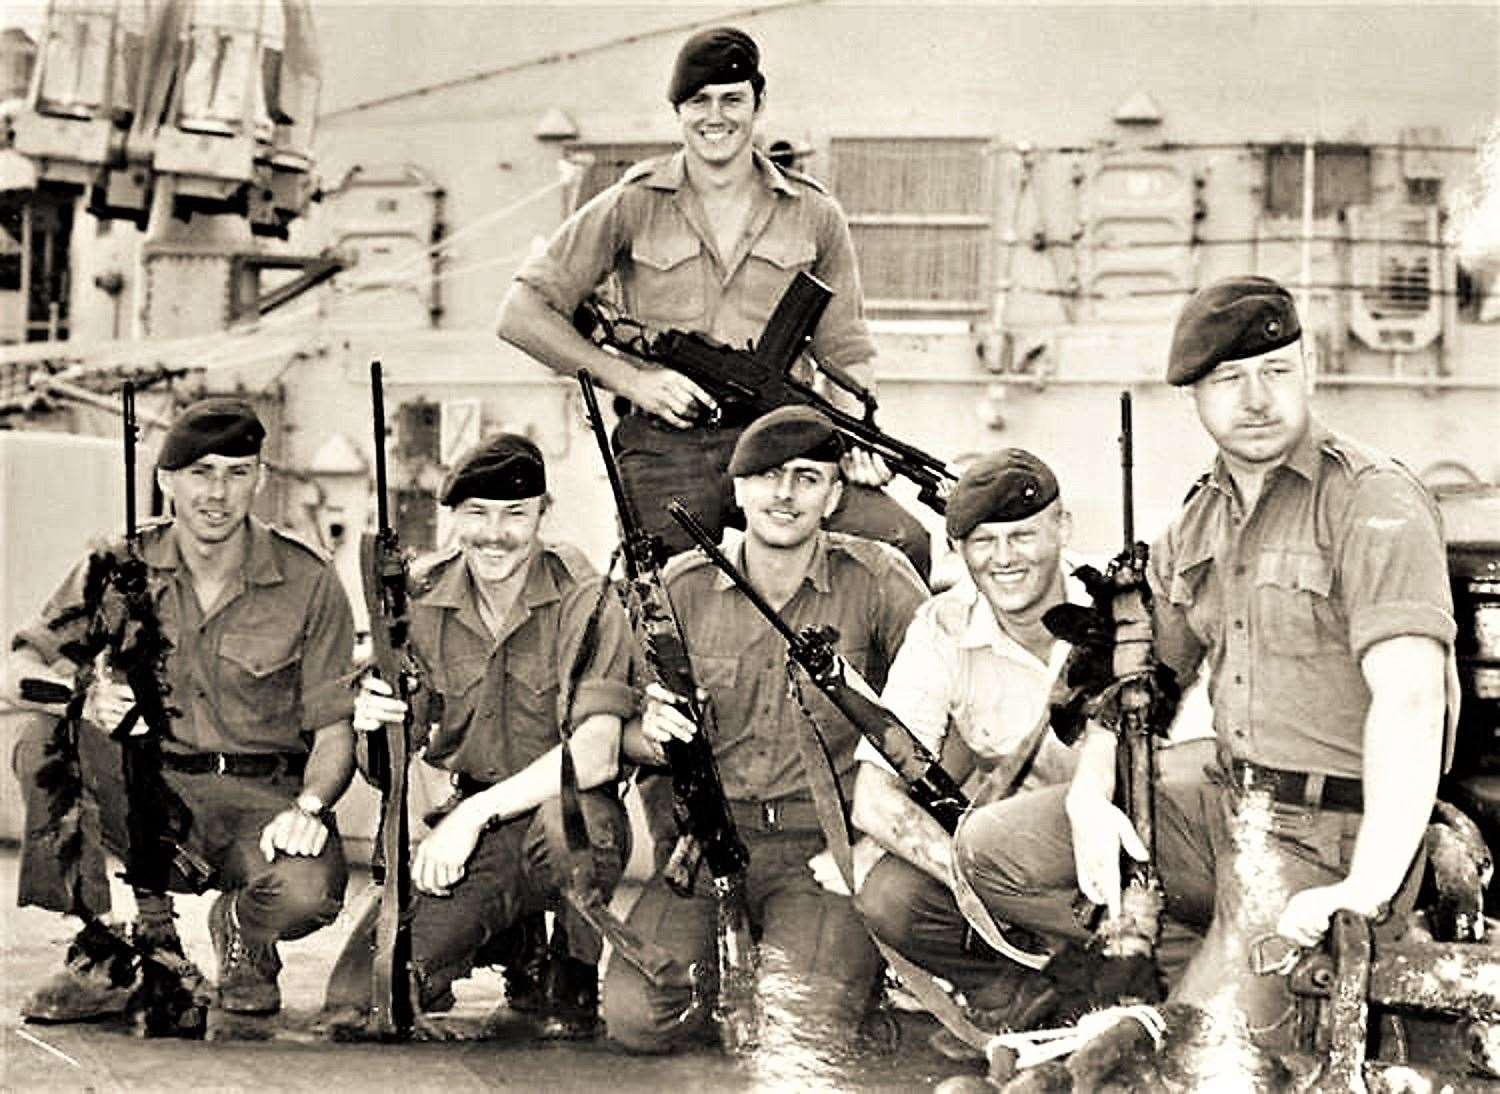 Ronnie is crouching in the middle of this picture taken during the time of the Falklands War and his friend Gerry Watt is on the extreme left. Both were injured during an Argentinian air attack that killed their friend Geordie Davison. The surviving soldiers honoured the memory of their late friend with a Caithness Glass bowl.